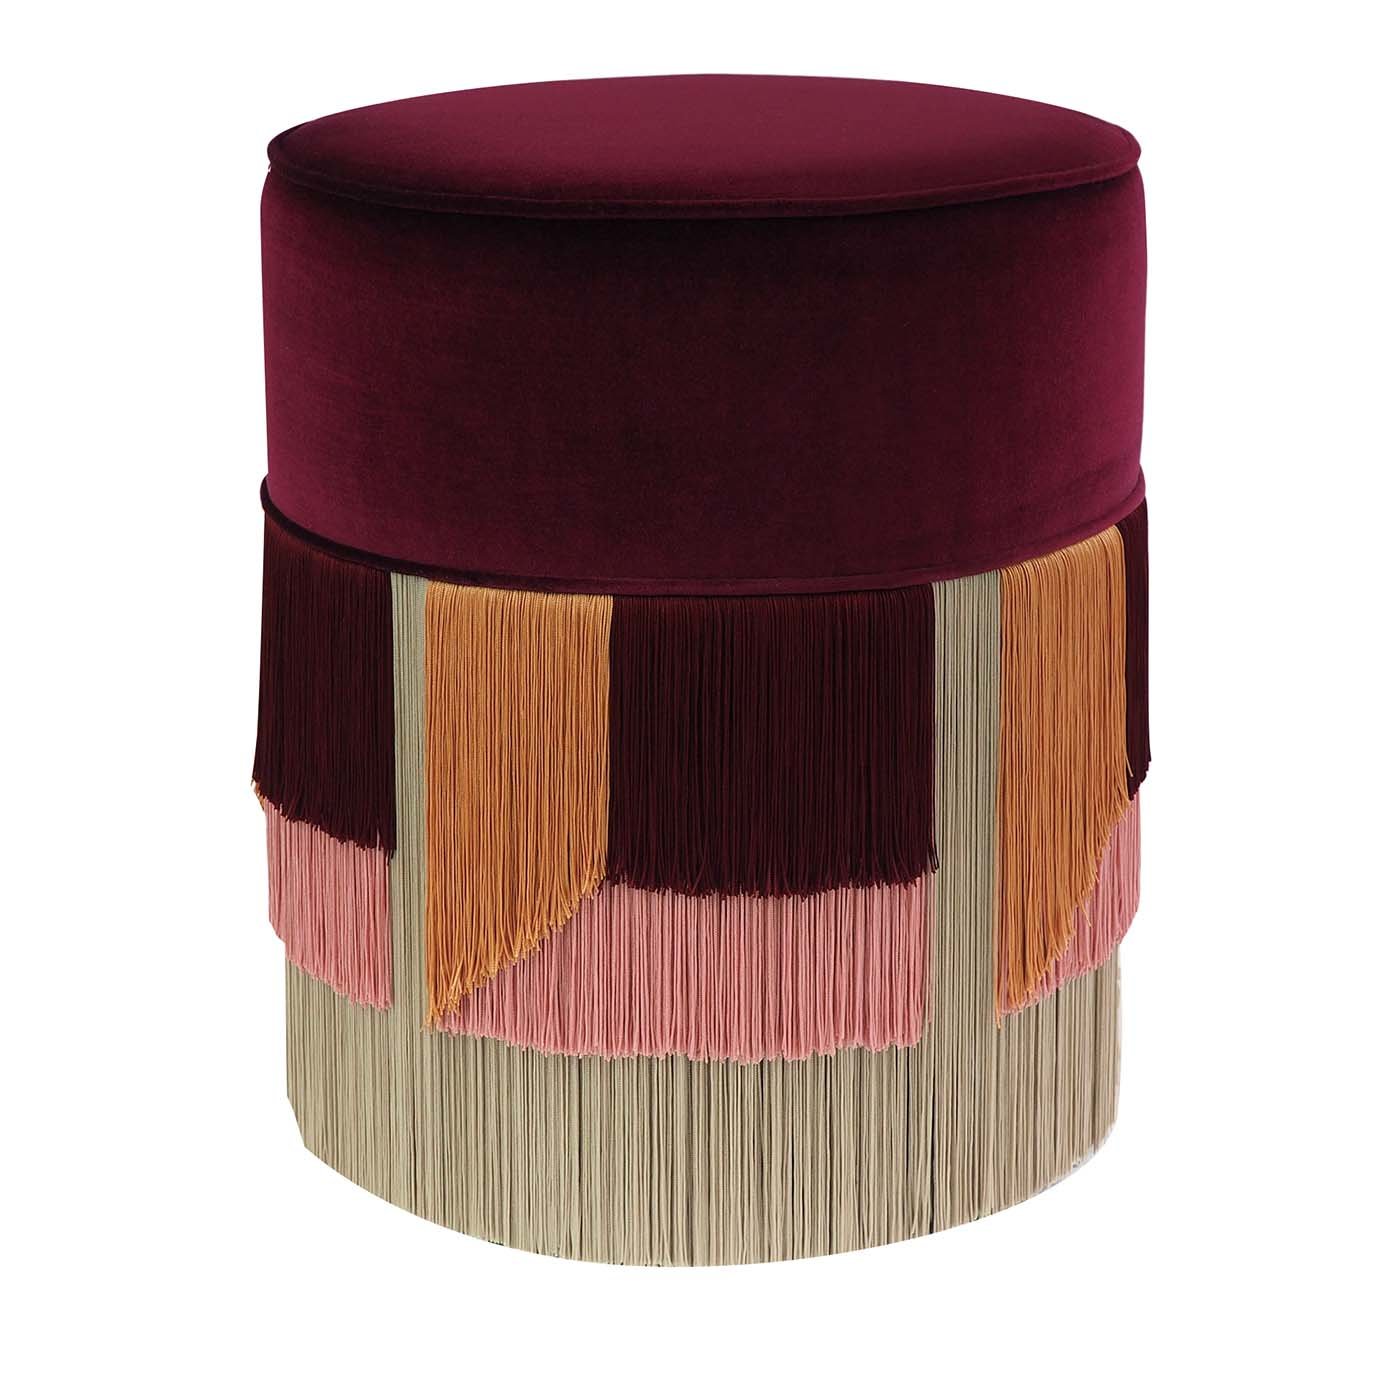 Burgundy Cylinder Wood Ottoman with Velvet Upholstery - Main view